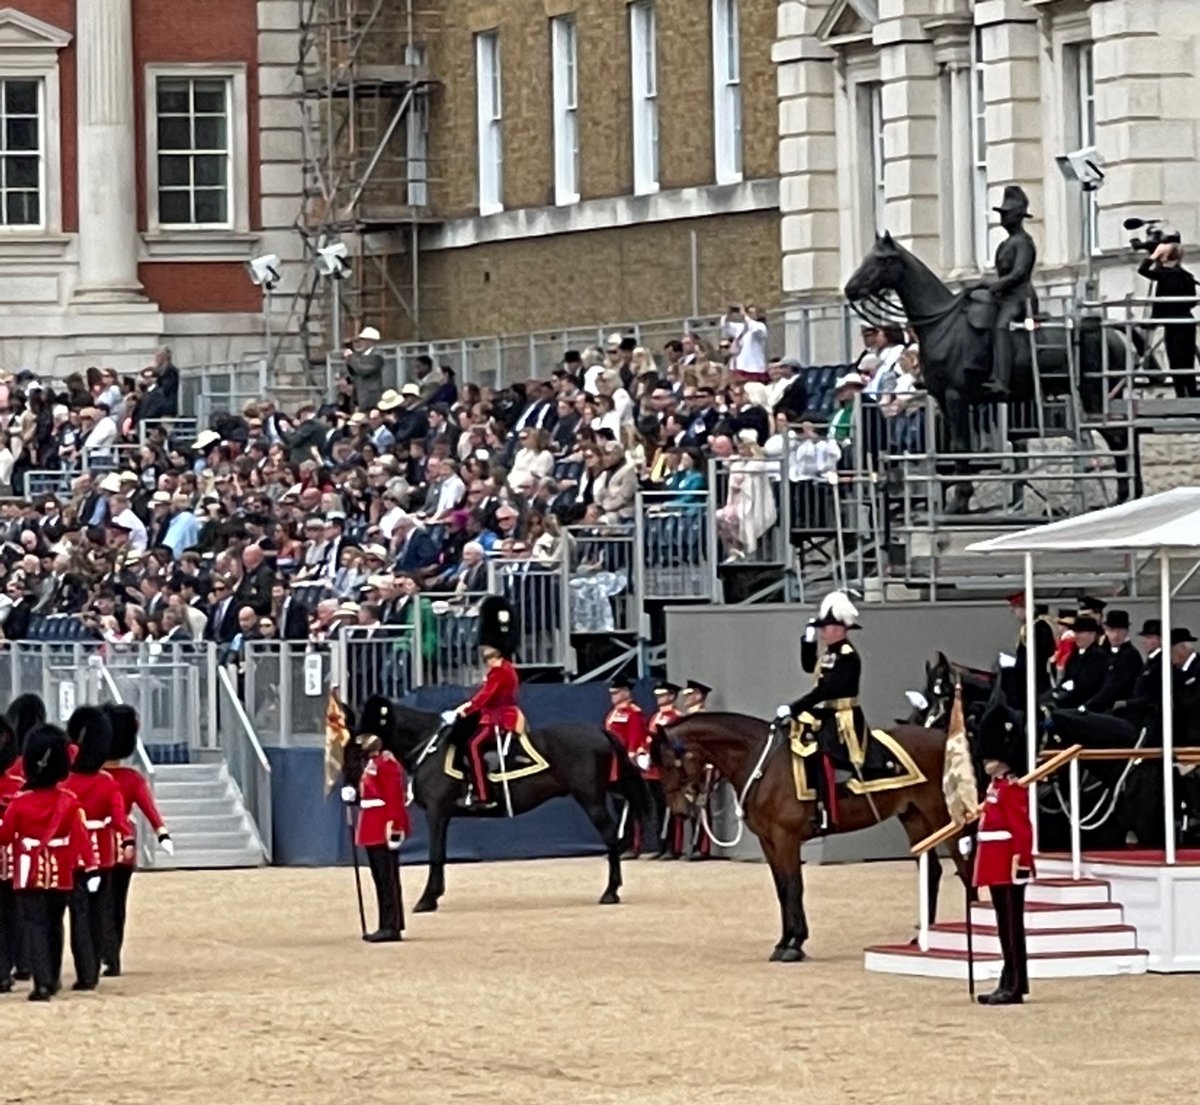 Enjoy watching the long held ceremony of #troopingthecolour in #London Amazing precision in this performance of the Troops and horses.